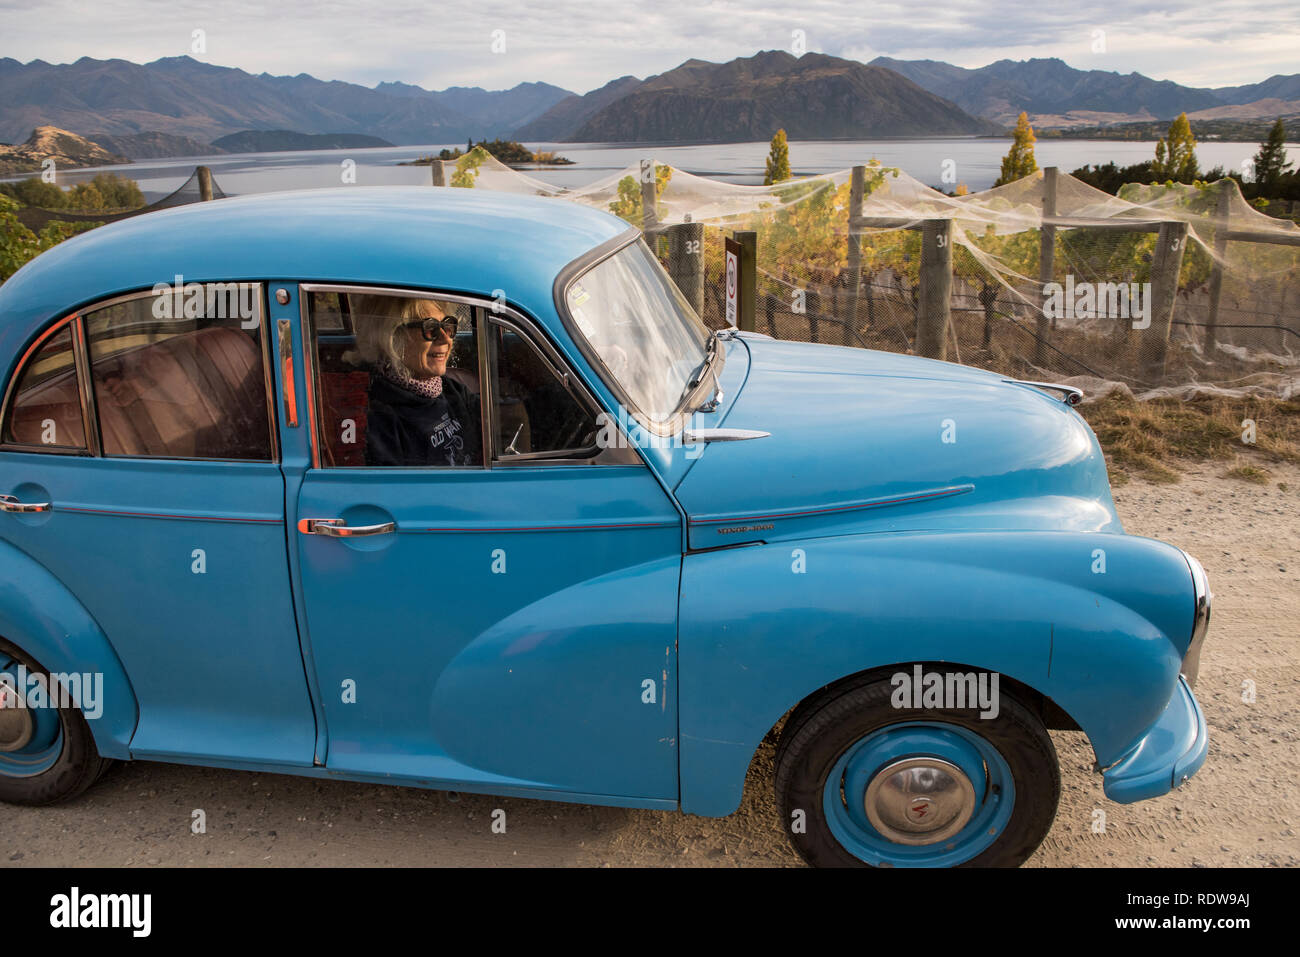 Workers harvest ripe grapes in autumn from vines in a vineyard in Wanaka, New Zealand. Woman driving old fashioned blue car. Stock Photo